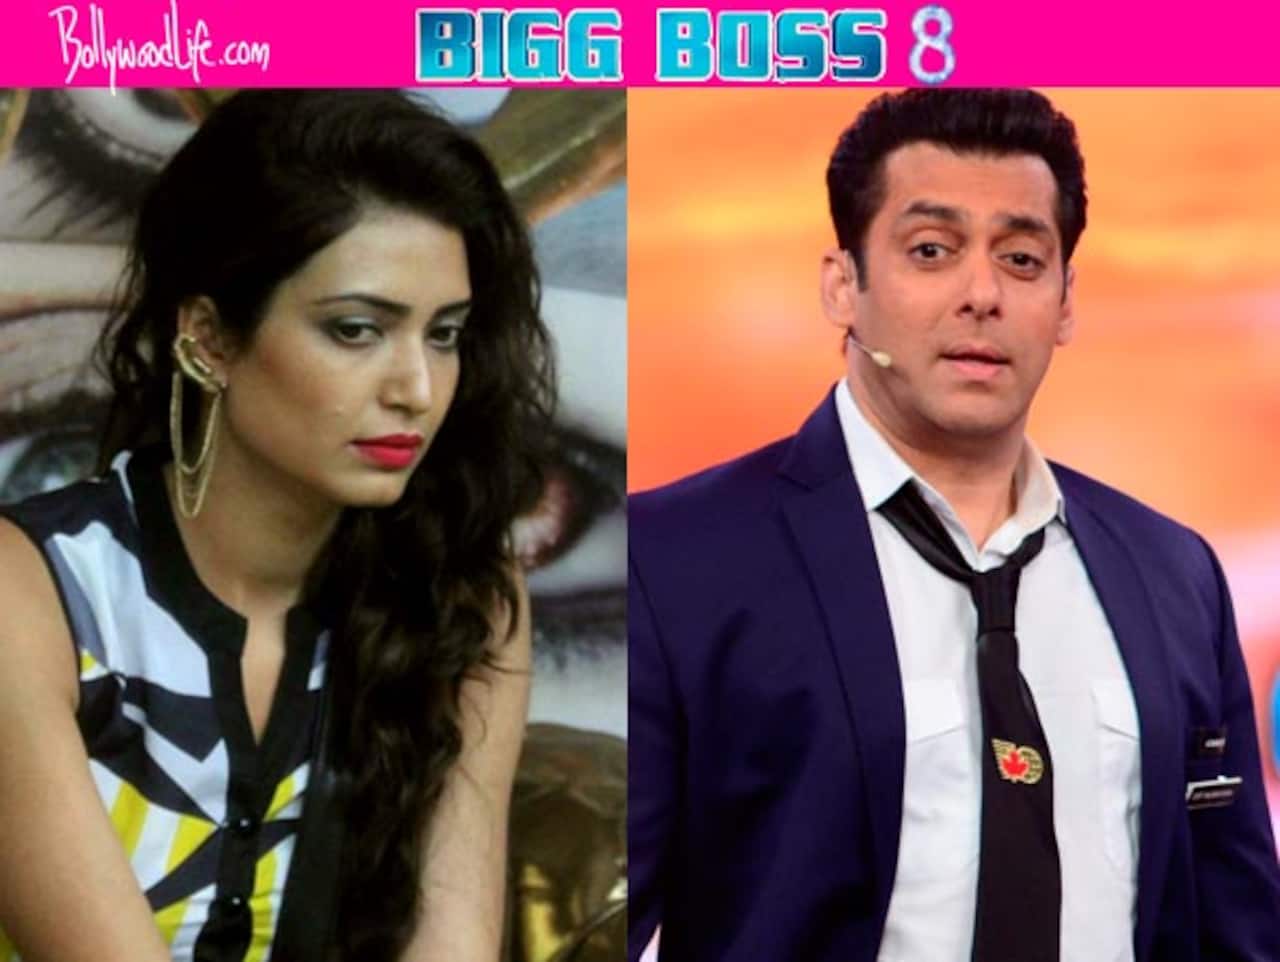 Bigg Boss 8 Do You Think Salman Khan Was Right To Get Angry With Karishma Tanna And Storming